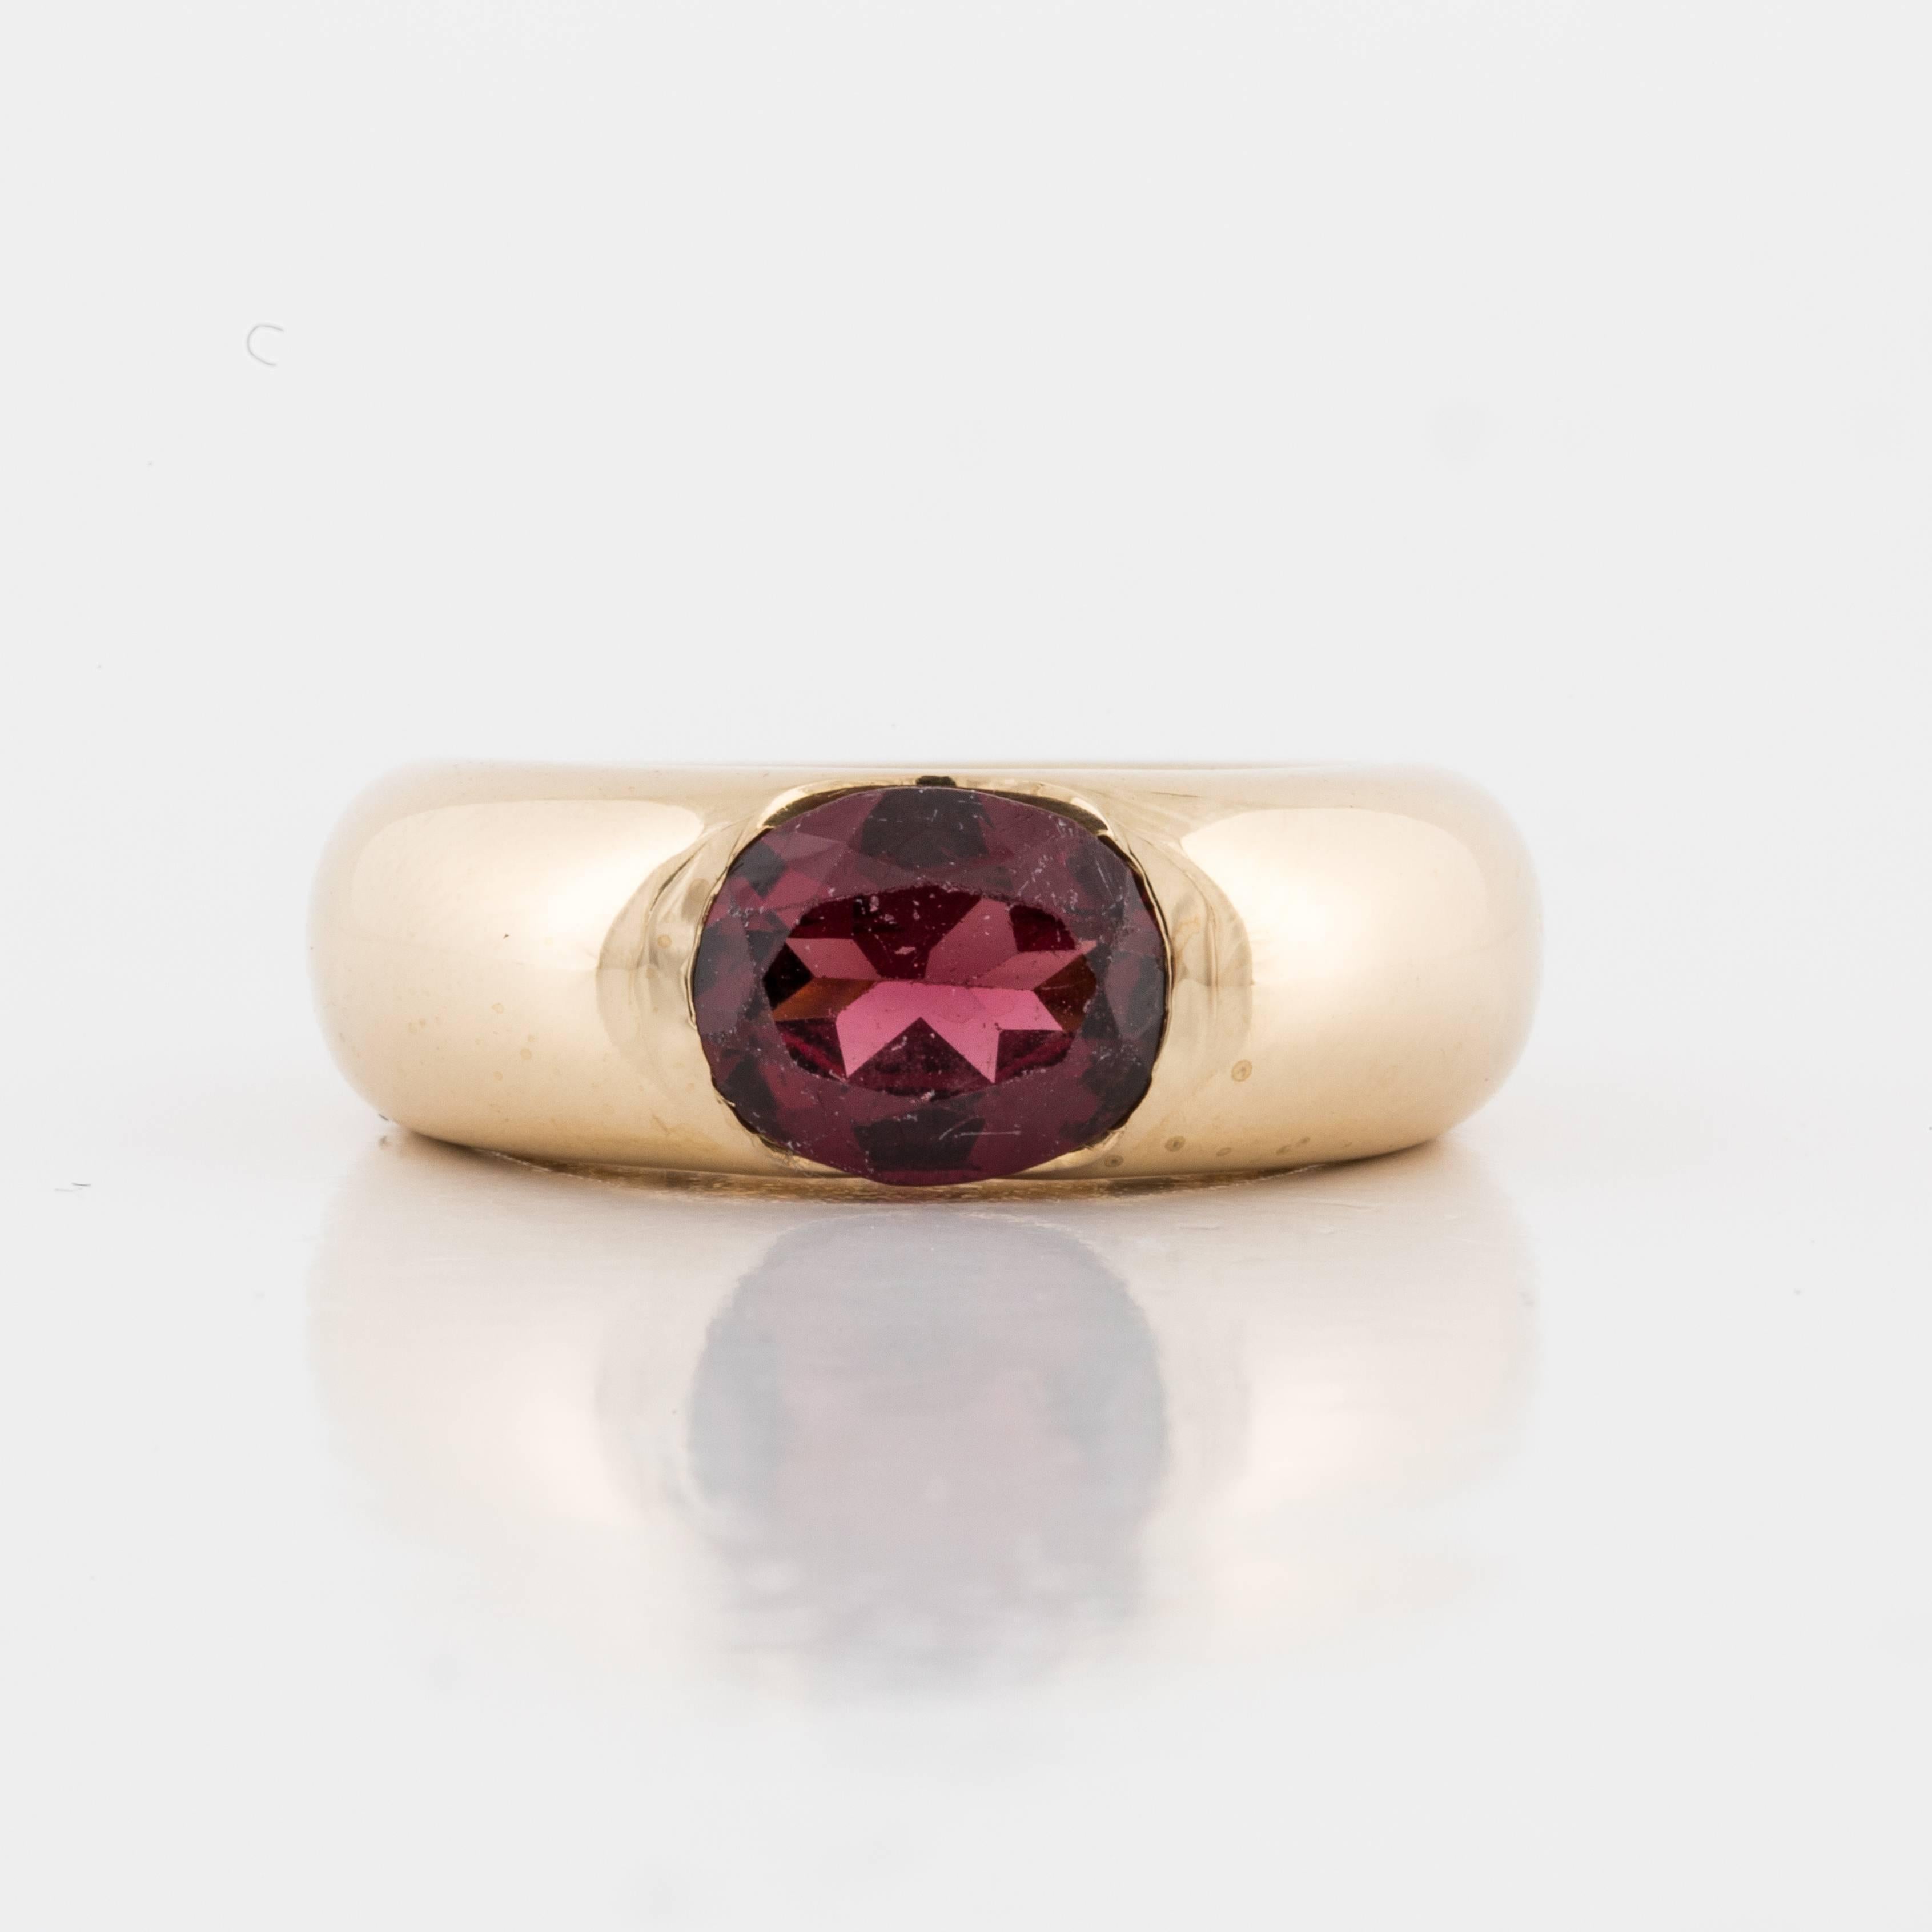 Cartier ring in 18K yellow gold featuring an oval faceted garnet.  The ring is marked on the inside 